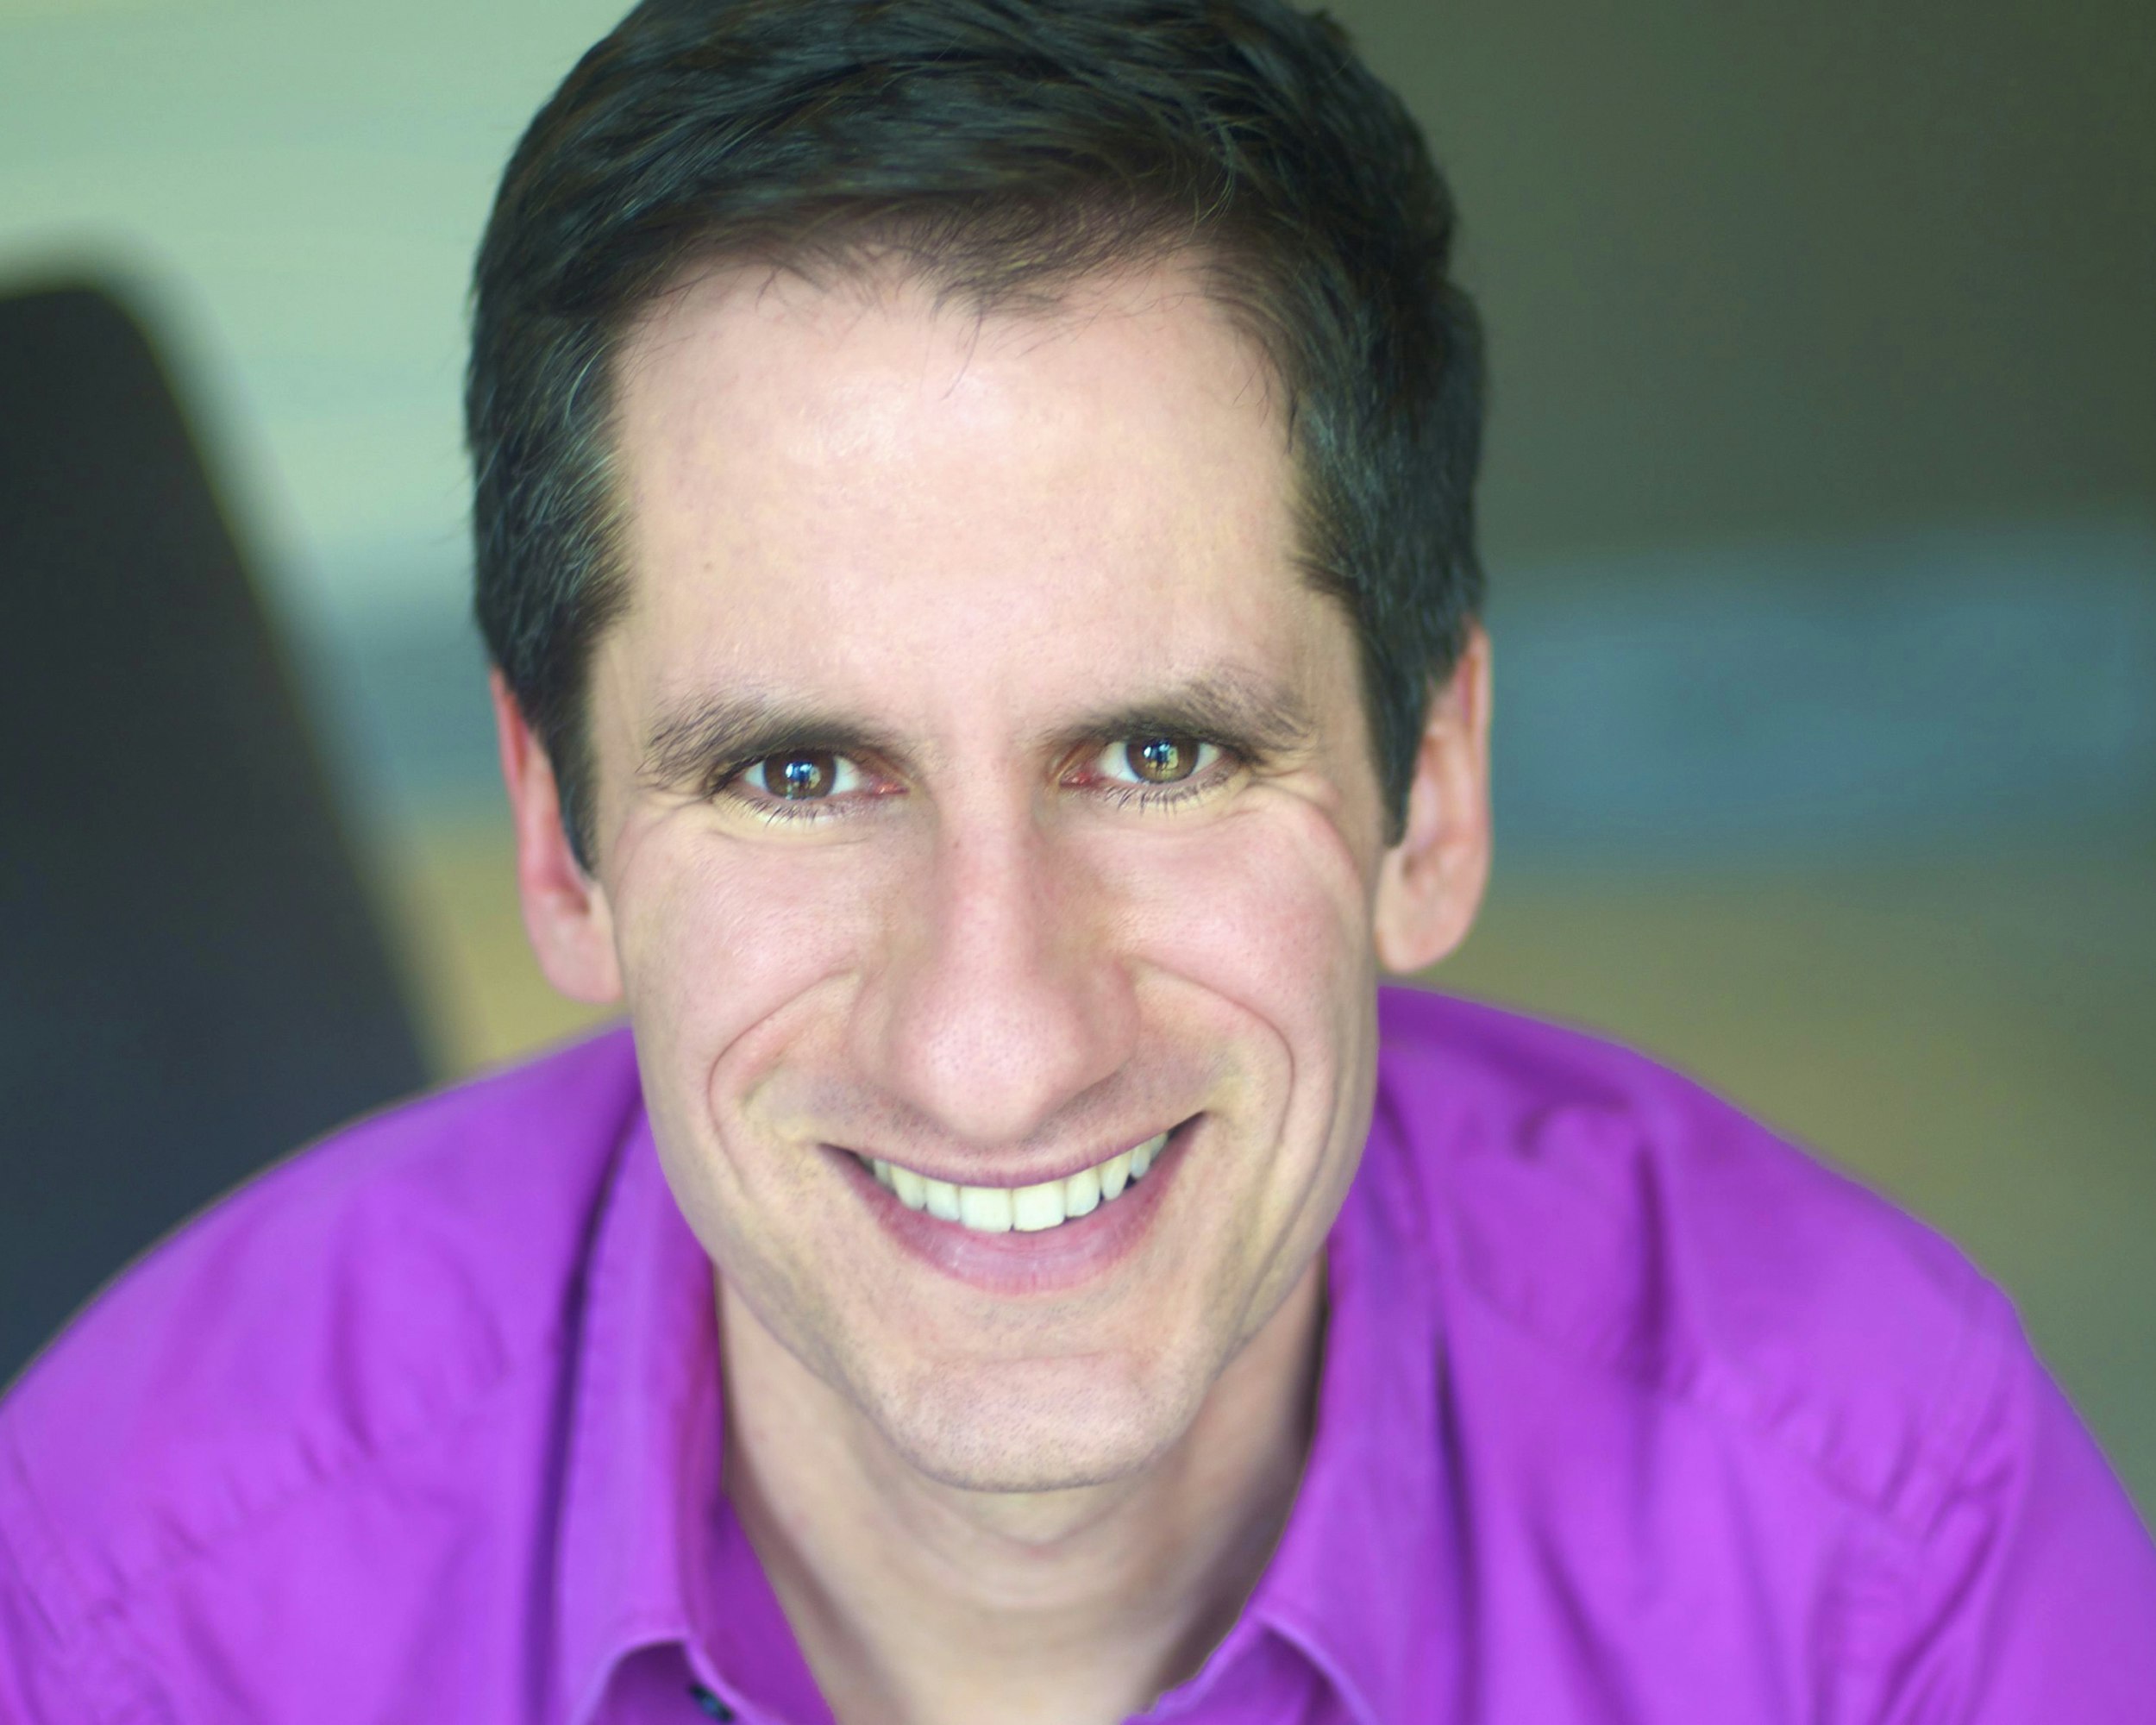 Seth Rudetsky's Broadway Series with Lillias White